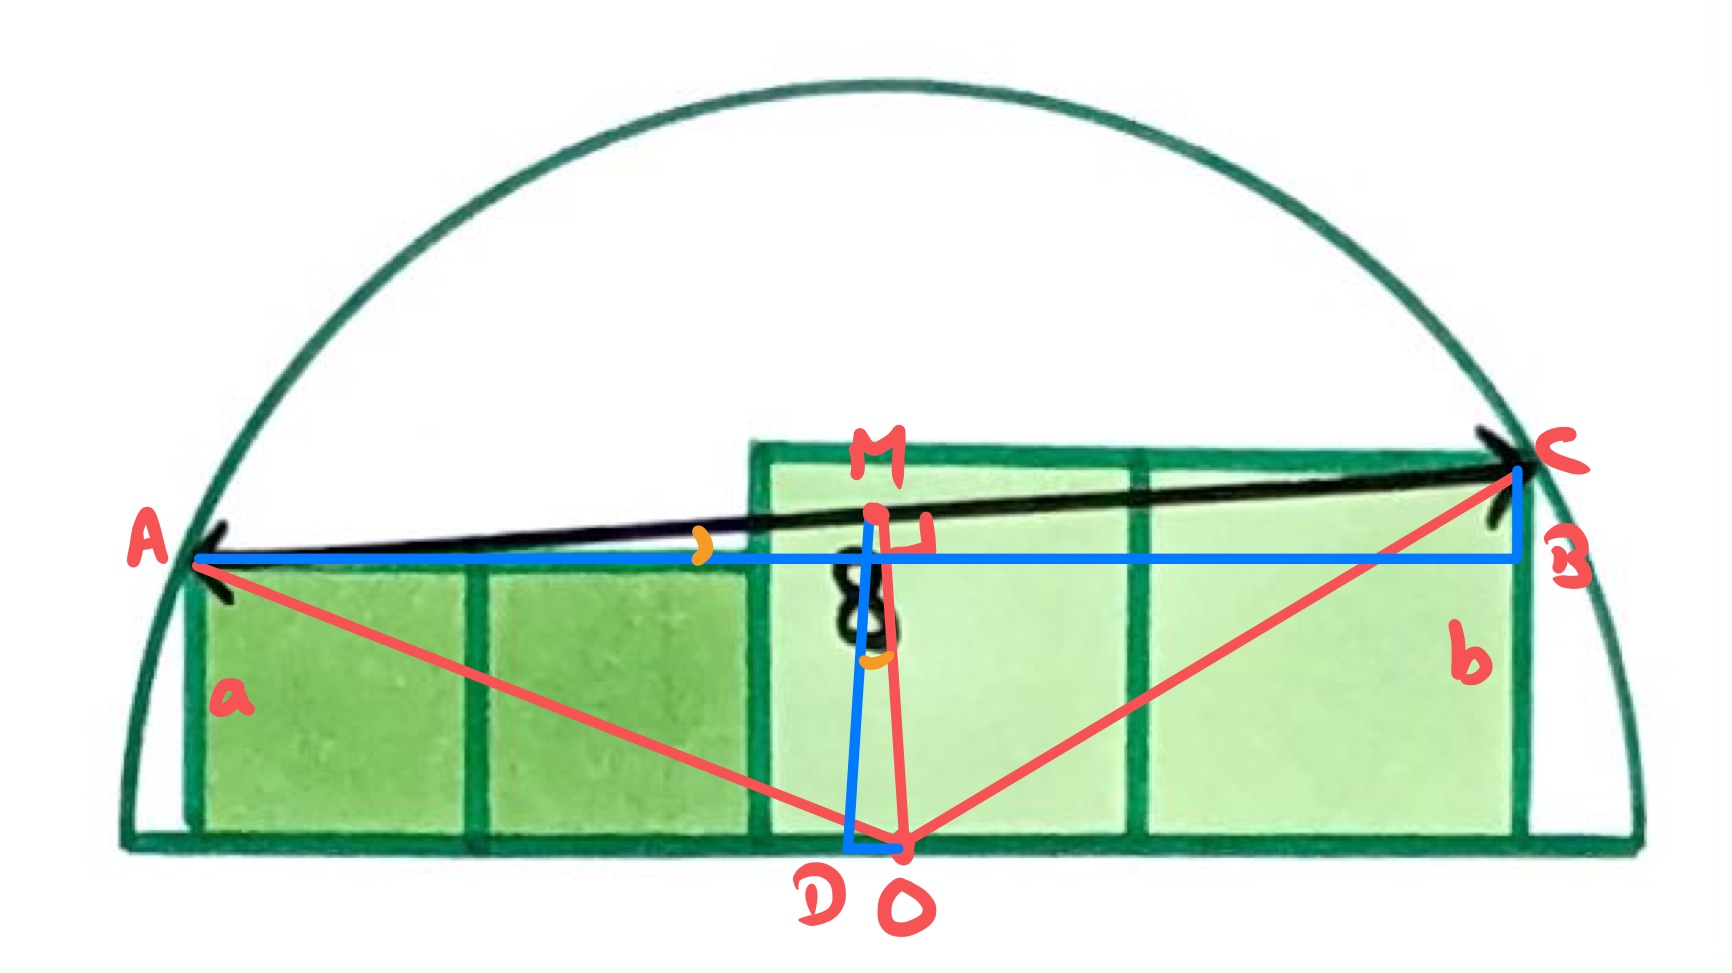 Four squares in a semi-circle with the midpoint